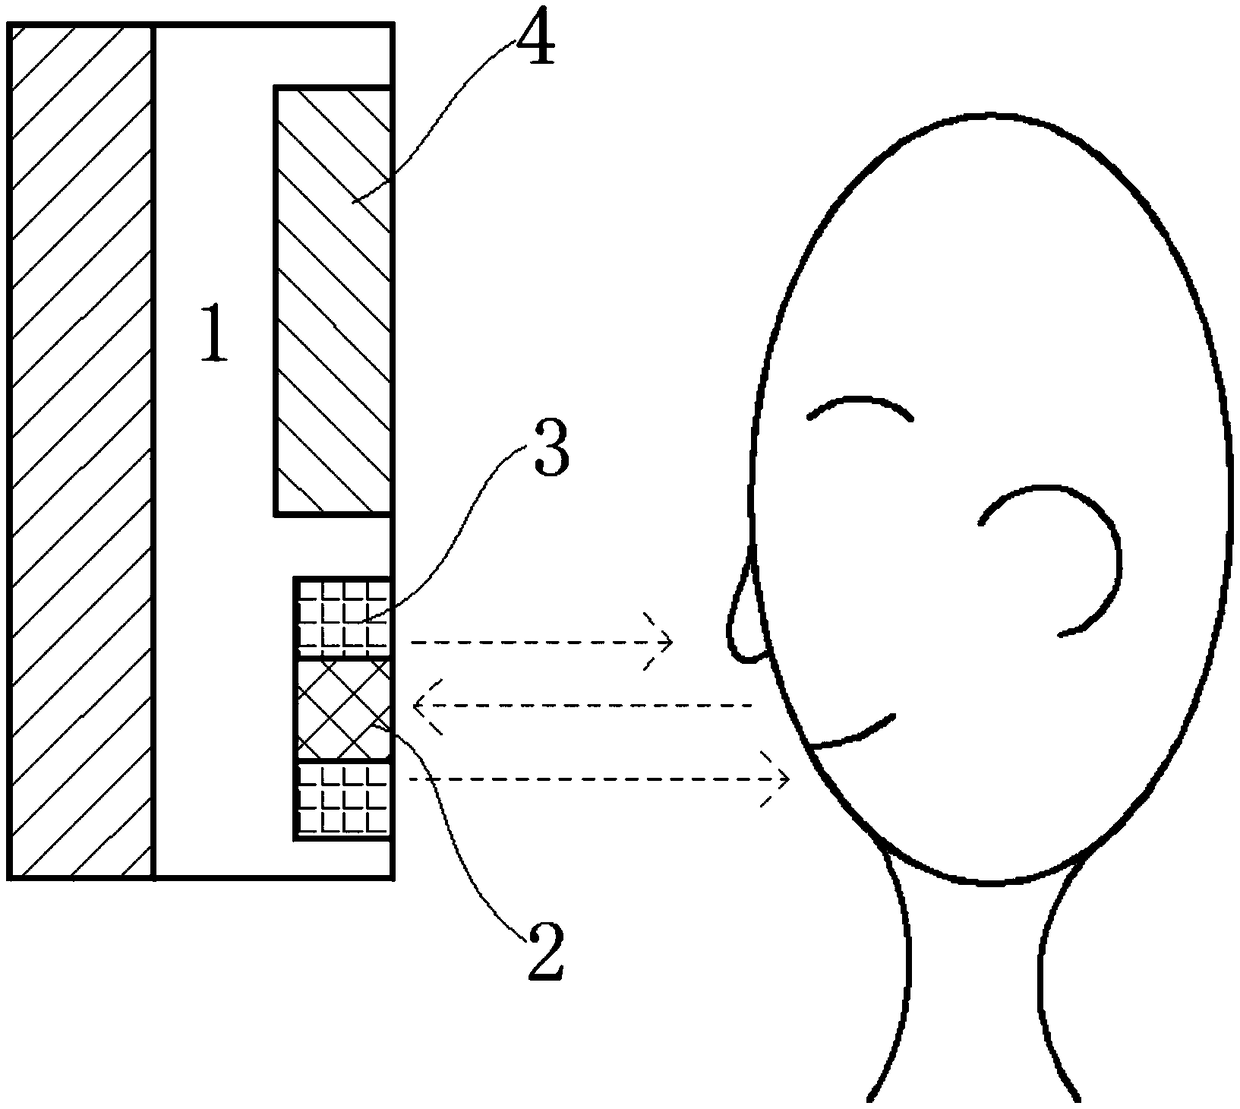 Intelligent X-ray machine facial information acquisition and processing system